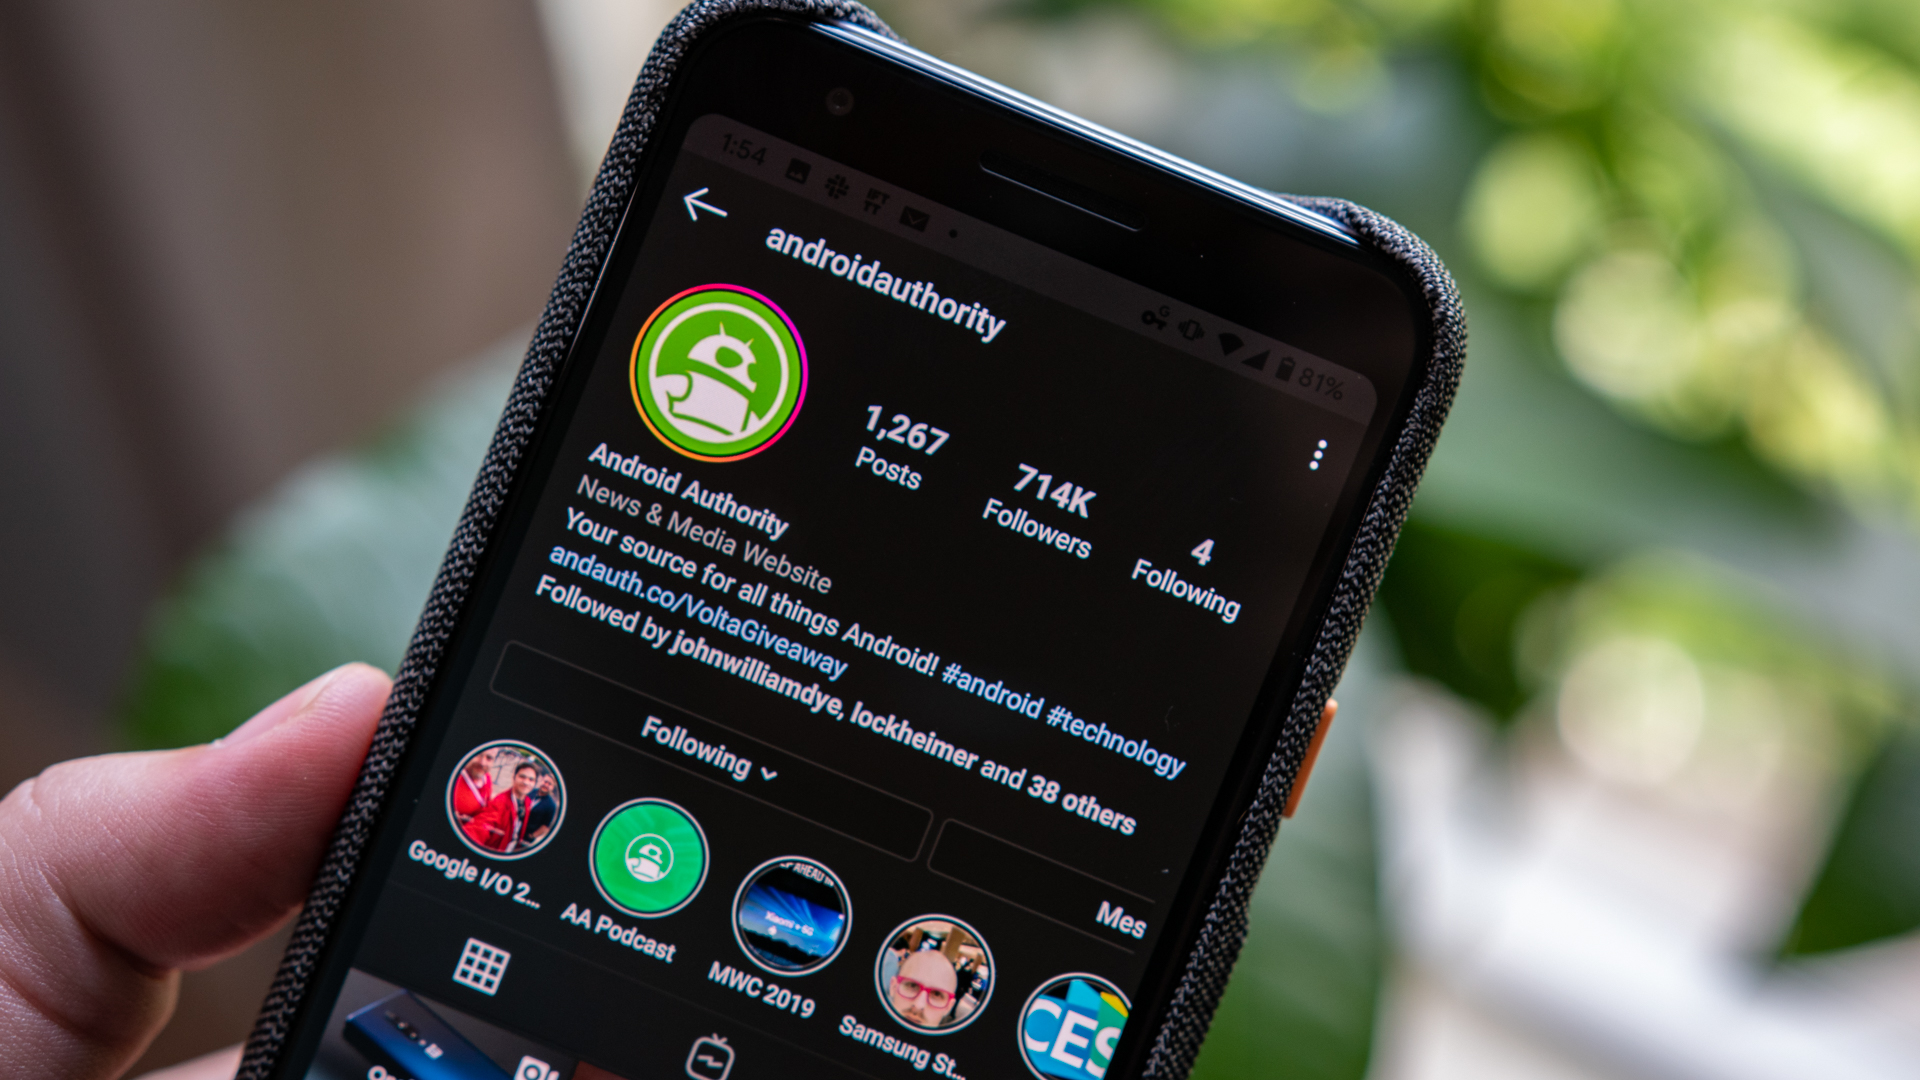 Is dark mode good for your eyes? Here's why you may want to avoid it.